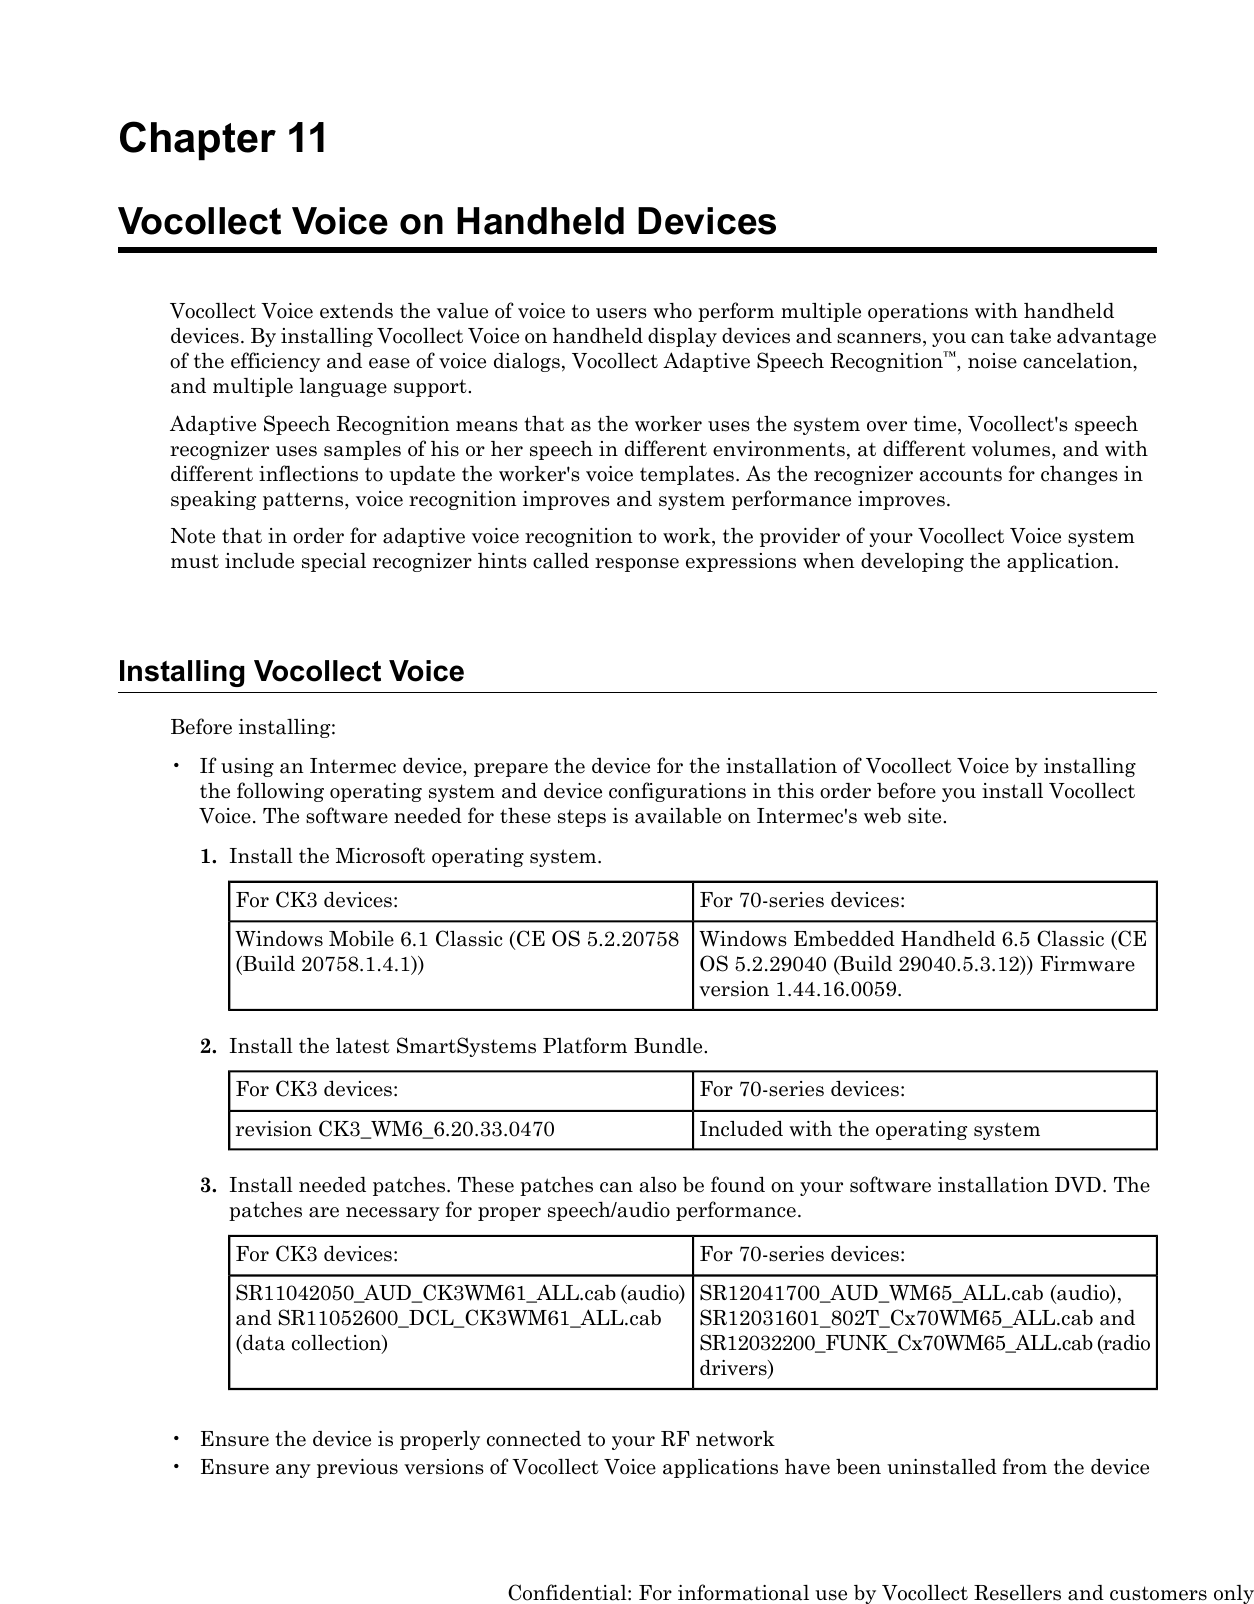 Chapter 11Vocollect Voice on Handheld DevicesVocollect Voice extends the value of voice to users who perform multiple operations with handhelddevices. By installing Vocollect Voice on handheld display devices and scanners, you can take advantageof the efficiency and ease of voice dialogs, Vocollect Adaptive Speech Recognition™, noise cancelation,and multiple language support.Adaptive Speech Recognition means that as the worker uses the system over time, Vocollect&apos;s speechrecognizer uses samples of his or her speech in different environments, at different volumes, and withdifferent inflections to update the worker&apos;s voice templates. As the recognizer accounts for changes inspeaking patterns, voice recognition improves and system performance improves.Note that in order for adaptive voice recognition to work, the provider of your Vocollect Voice systemmust include special recognizer hints called response expressions when developing the application.Installing Vocollect VoiceBefore installing:• If using an Intermec device, prepare the device for the installation of Vocollect Voice by installingthe following operating system and device configurations in this order before you install VocollectVoice. The software needed for these steps is available on Intermec&apos;s web site.1. Install the Microsoft operating system.For 70-series devices:For CK3 devices:Windows Embedded Handheld 6.5 Classic (CEOS 5.2.29040 (Build 29040.5.3.12)) Firmwareversion 1.44.16.0059.Windows Mobile 6.1 Classic (CE OS 5.2.20758(Build 20758.1.4.1))2. Install the latest SmartSystems Platform Bundle.For 70-series devices:For CK3 devices:Included with the operating systemrevision CK3_WM6_6.20.33.04703. Install needed patches. These patches can also be found on your software installation DVD. Thepatches are necessary for proper speech/audio performance.For 70-series devices:For CK3 devices:SR12041700_AUD_WM65_ALL.cab (audio),SR12031601_802T_Cx70WM65_ALL.cab andSR11042050_AUD_CK3WM61_ALL.cab (audio)and SR11052600_DCL_CK3WM61_ALL.cab(data collection) SR12032200_FUNK_Cx70WM65_ALL.cab (radiodrivers)• Ensure the device is properly connected to your RF network• Ensure any previous versions of Vocollect Voice applications have been uninstalled from the deviceConfidential: For informational use by Vocollect Resellers and customers only